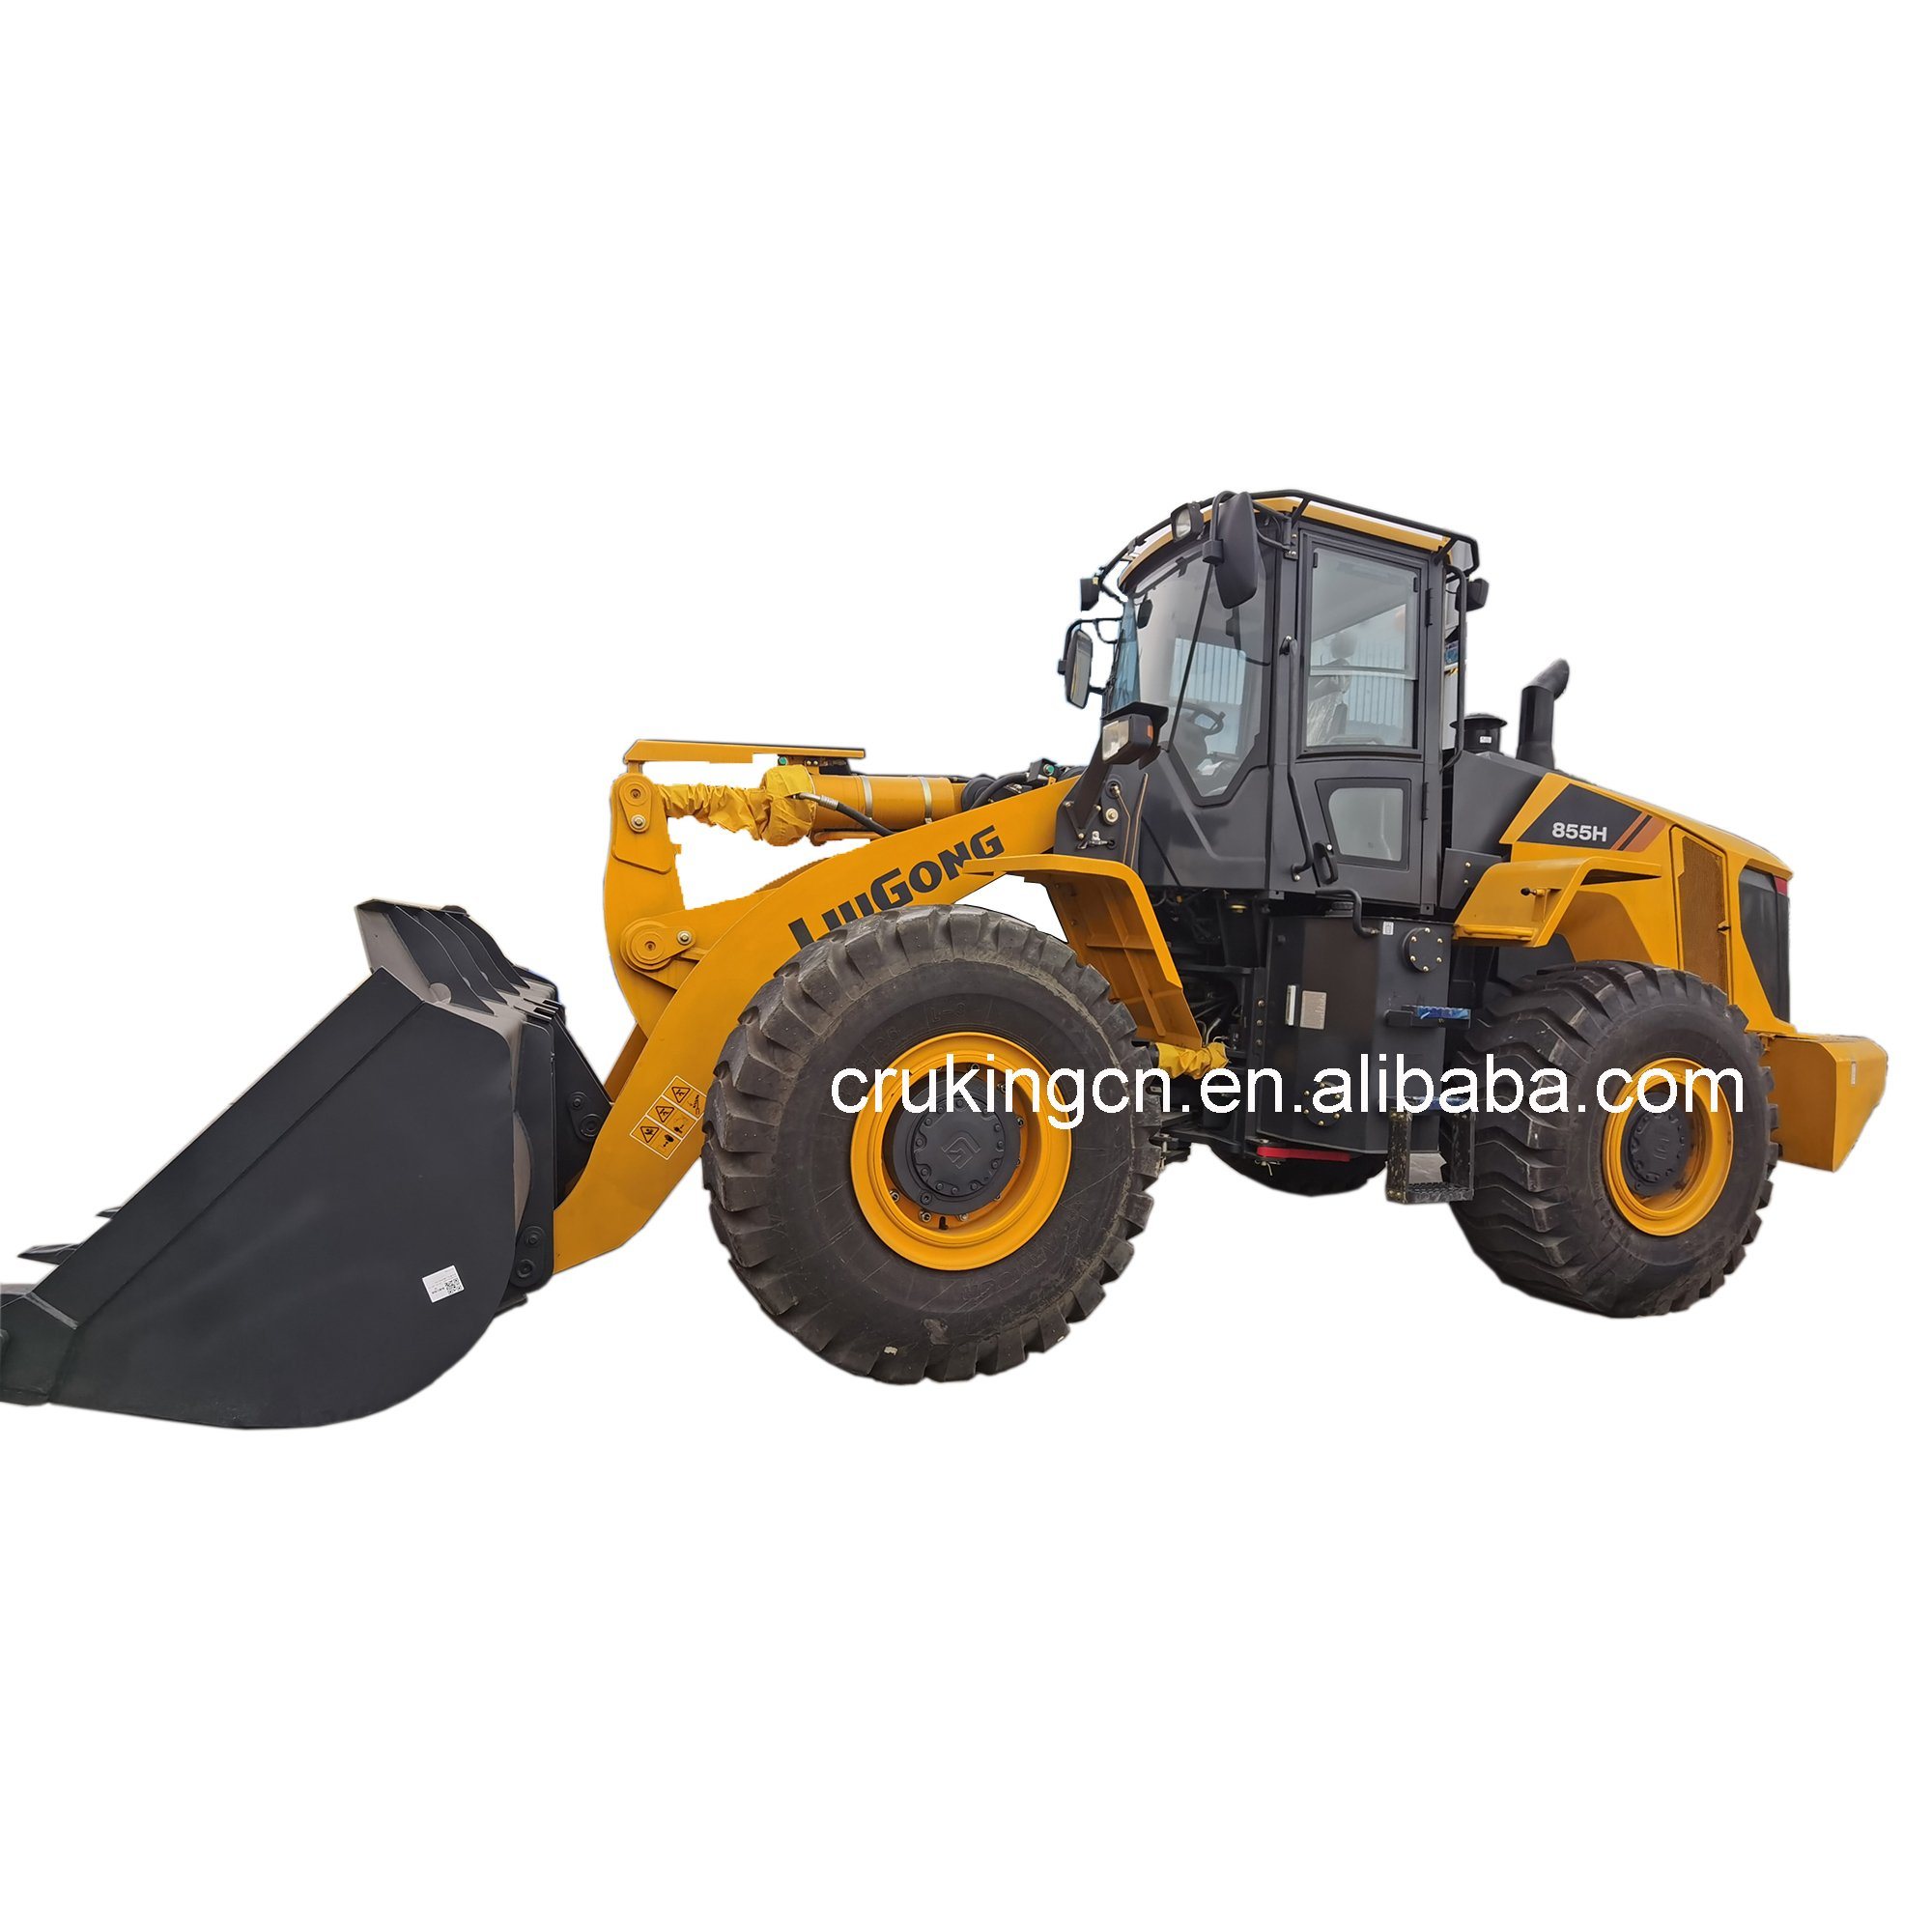 Liugong 5 Ton Wheel Loader Clg856h for Sale in Peru